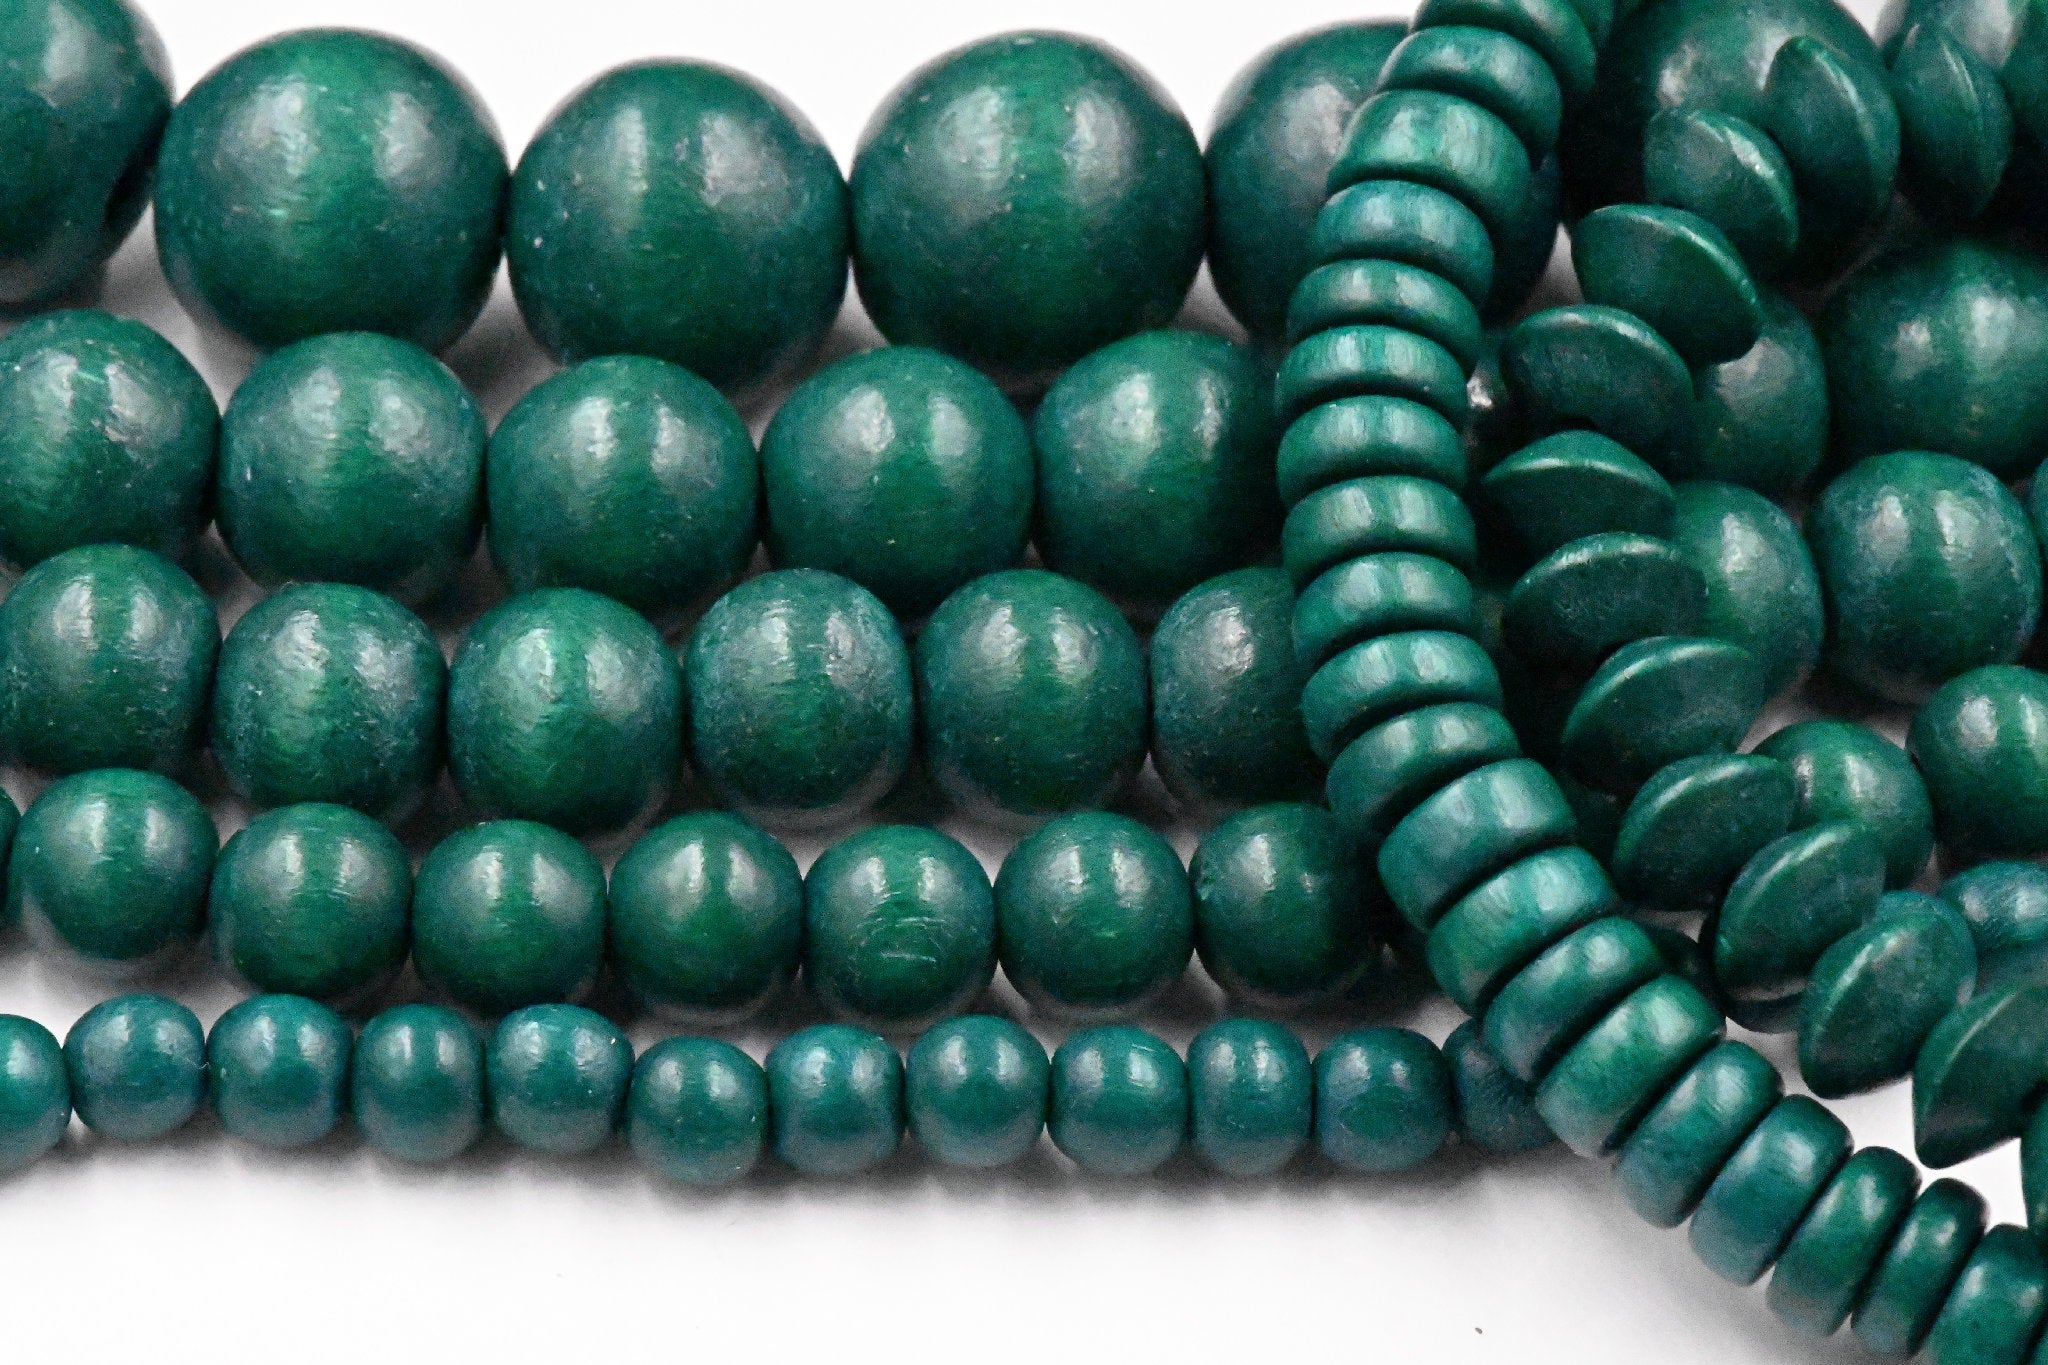 10mm Round Green Wooden Beads for Crafts, Waxed Dyed Natural Wood